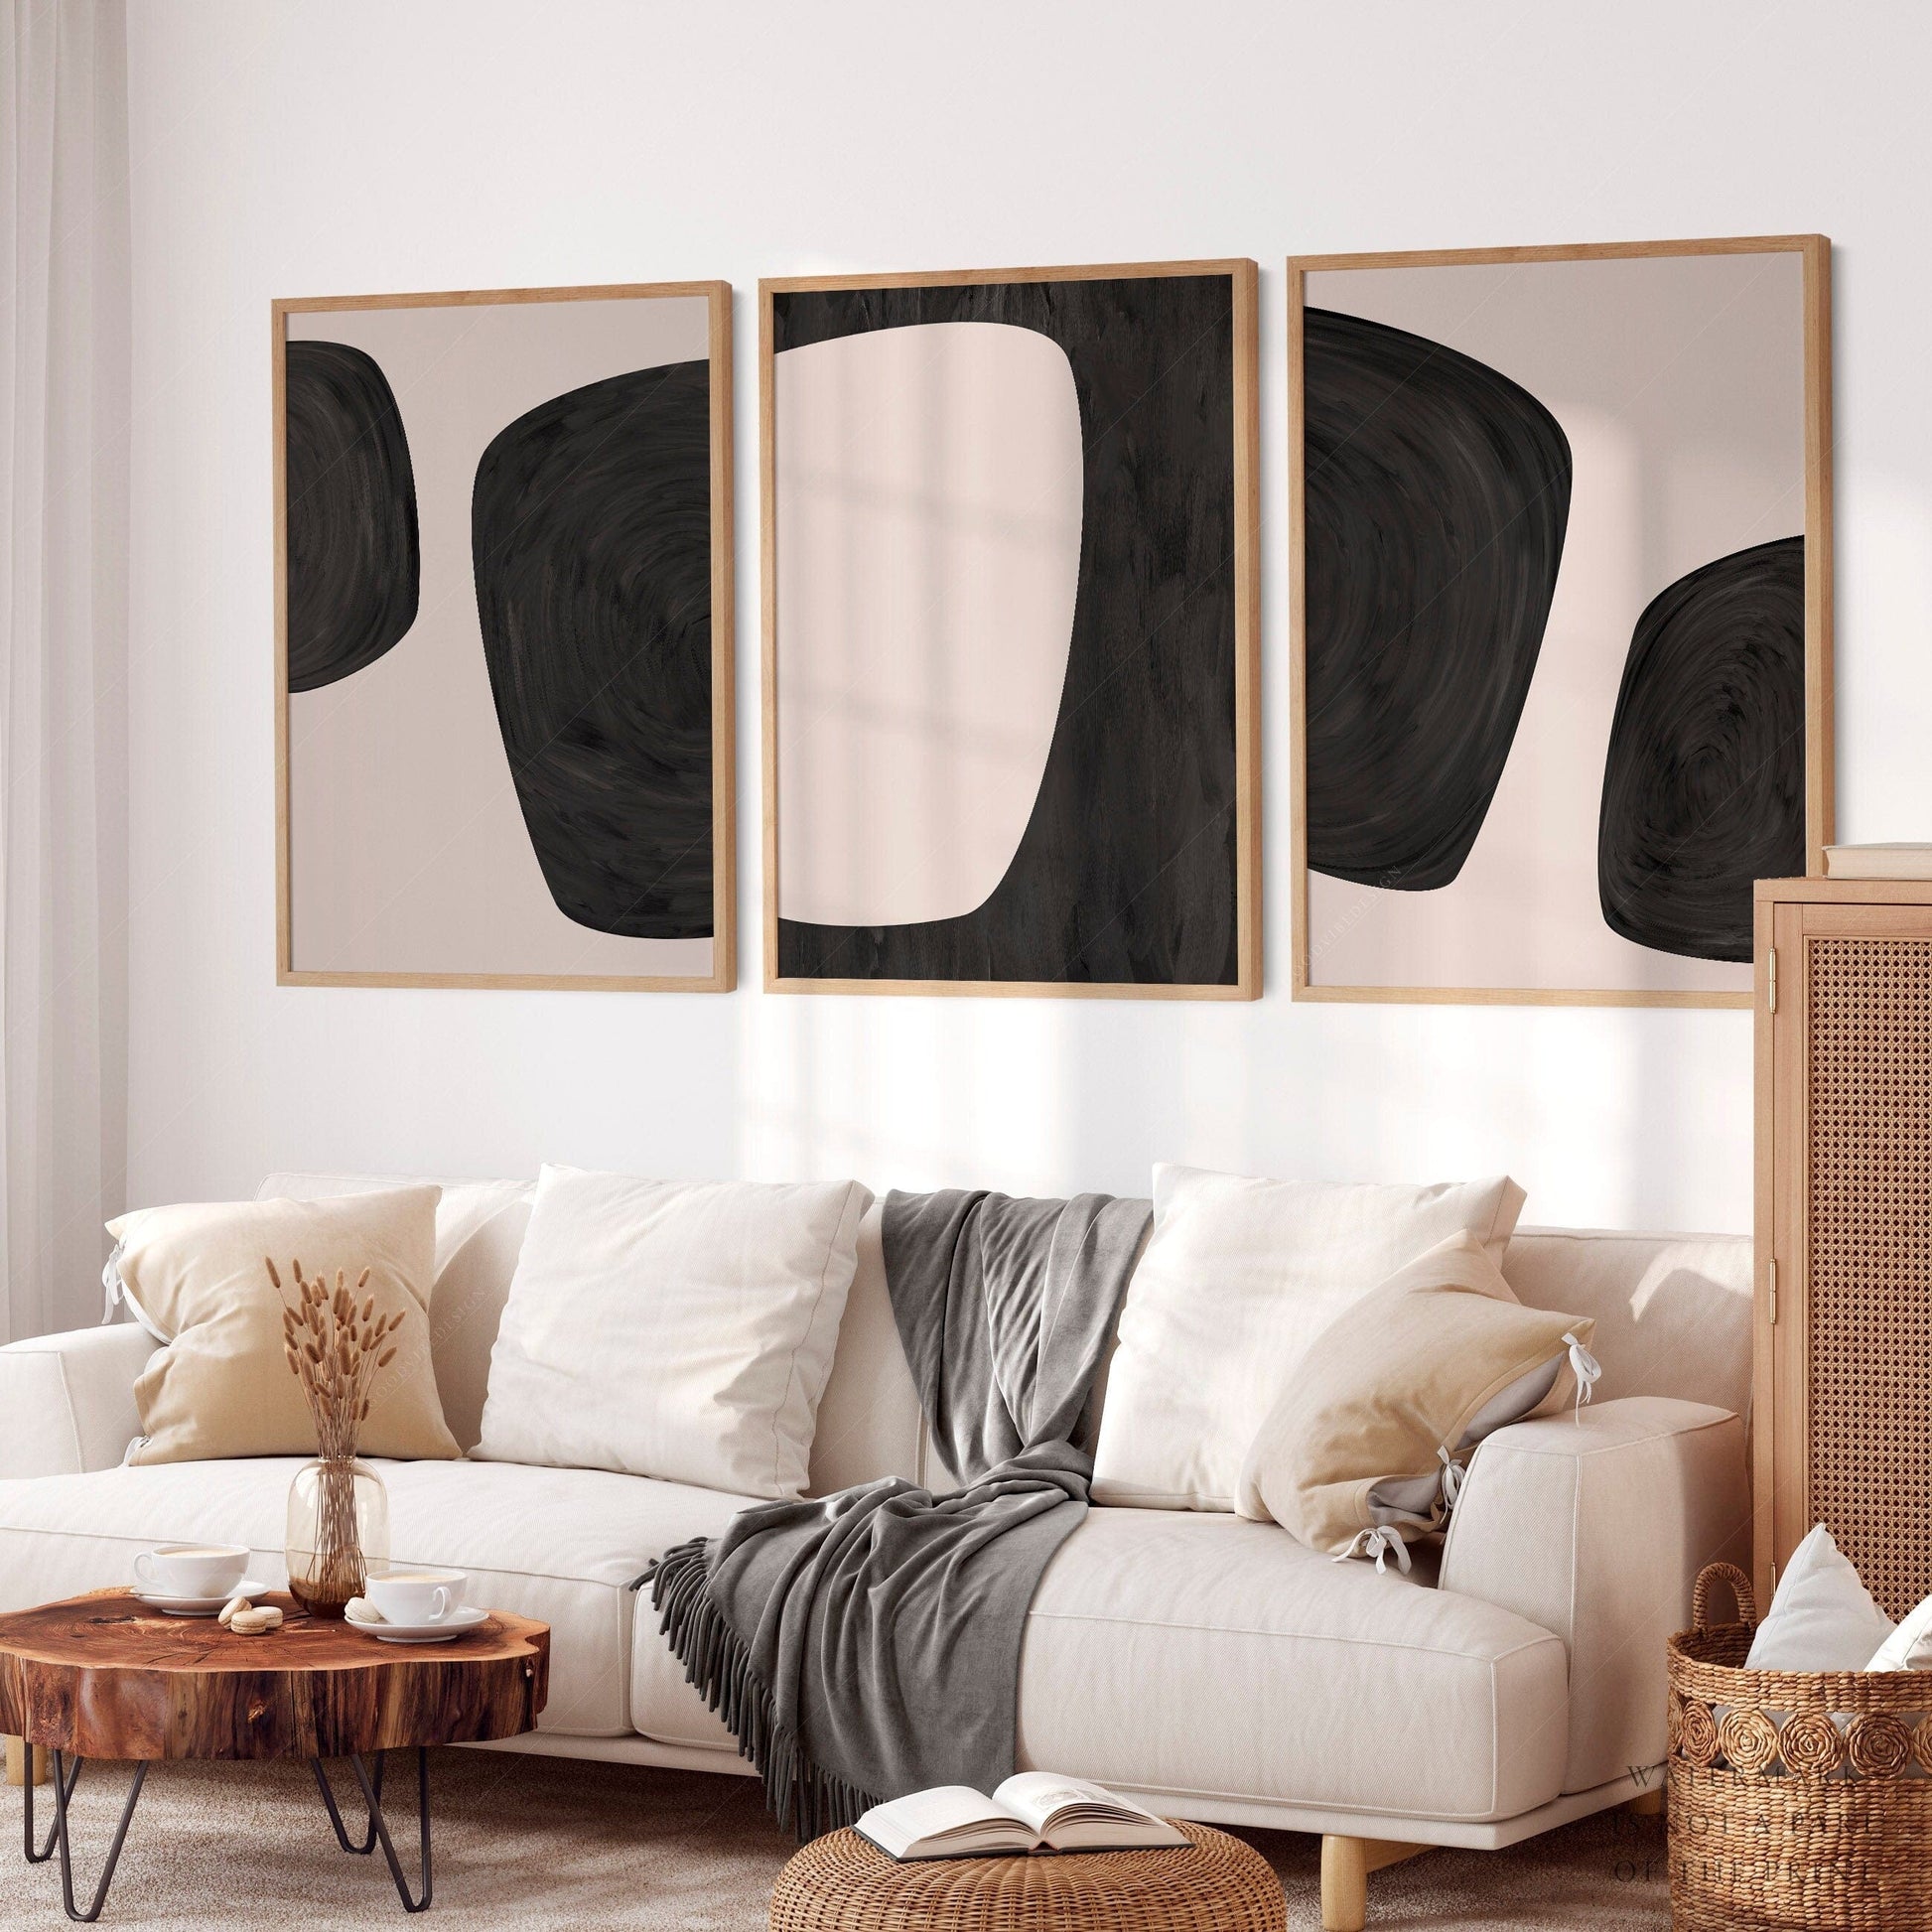 Home Poster Decor Set of 3 Modern Set of 3 Art, Neutral Tones, Beige Black Minimalist, Gallery Wall, Abstract Wall Art, Simple Shapes, Line Print, Living Wall Decor 11